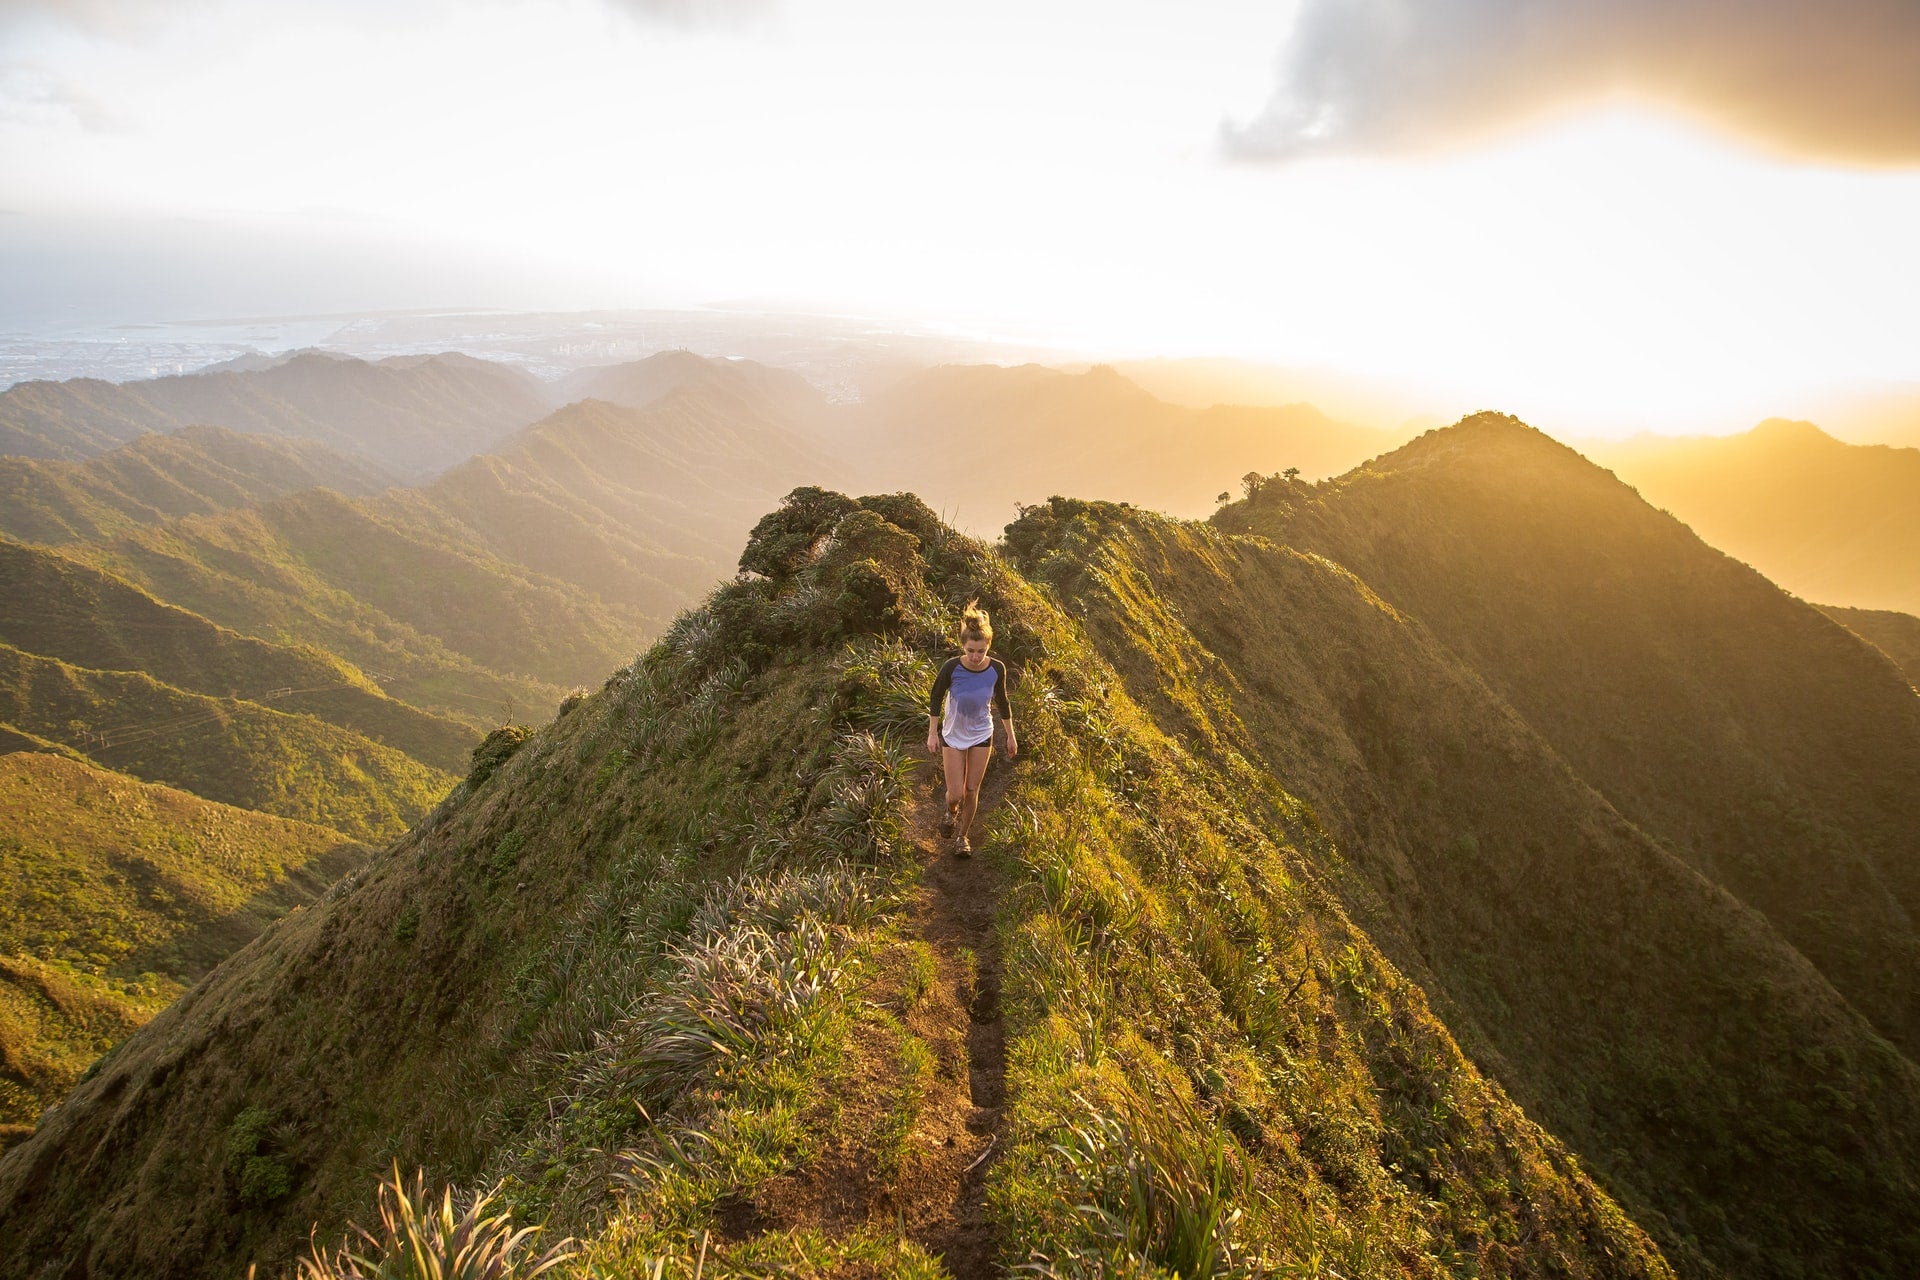 young woman hiking on lush green mountaintop with sunrise and distant mountain ranges in background